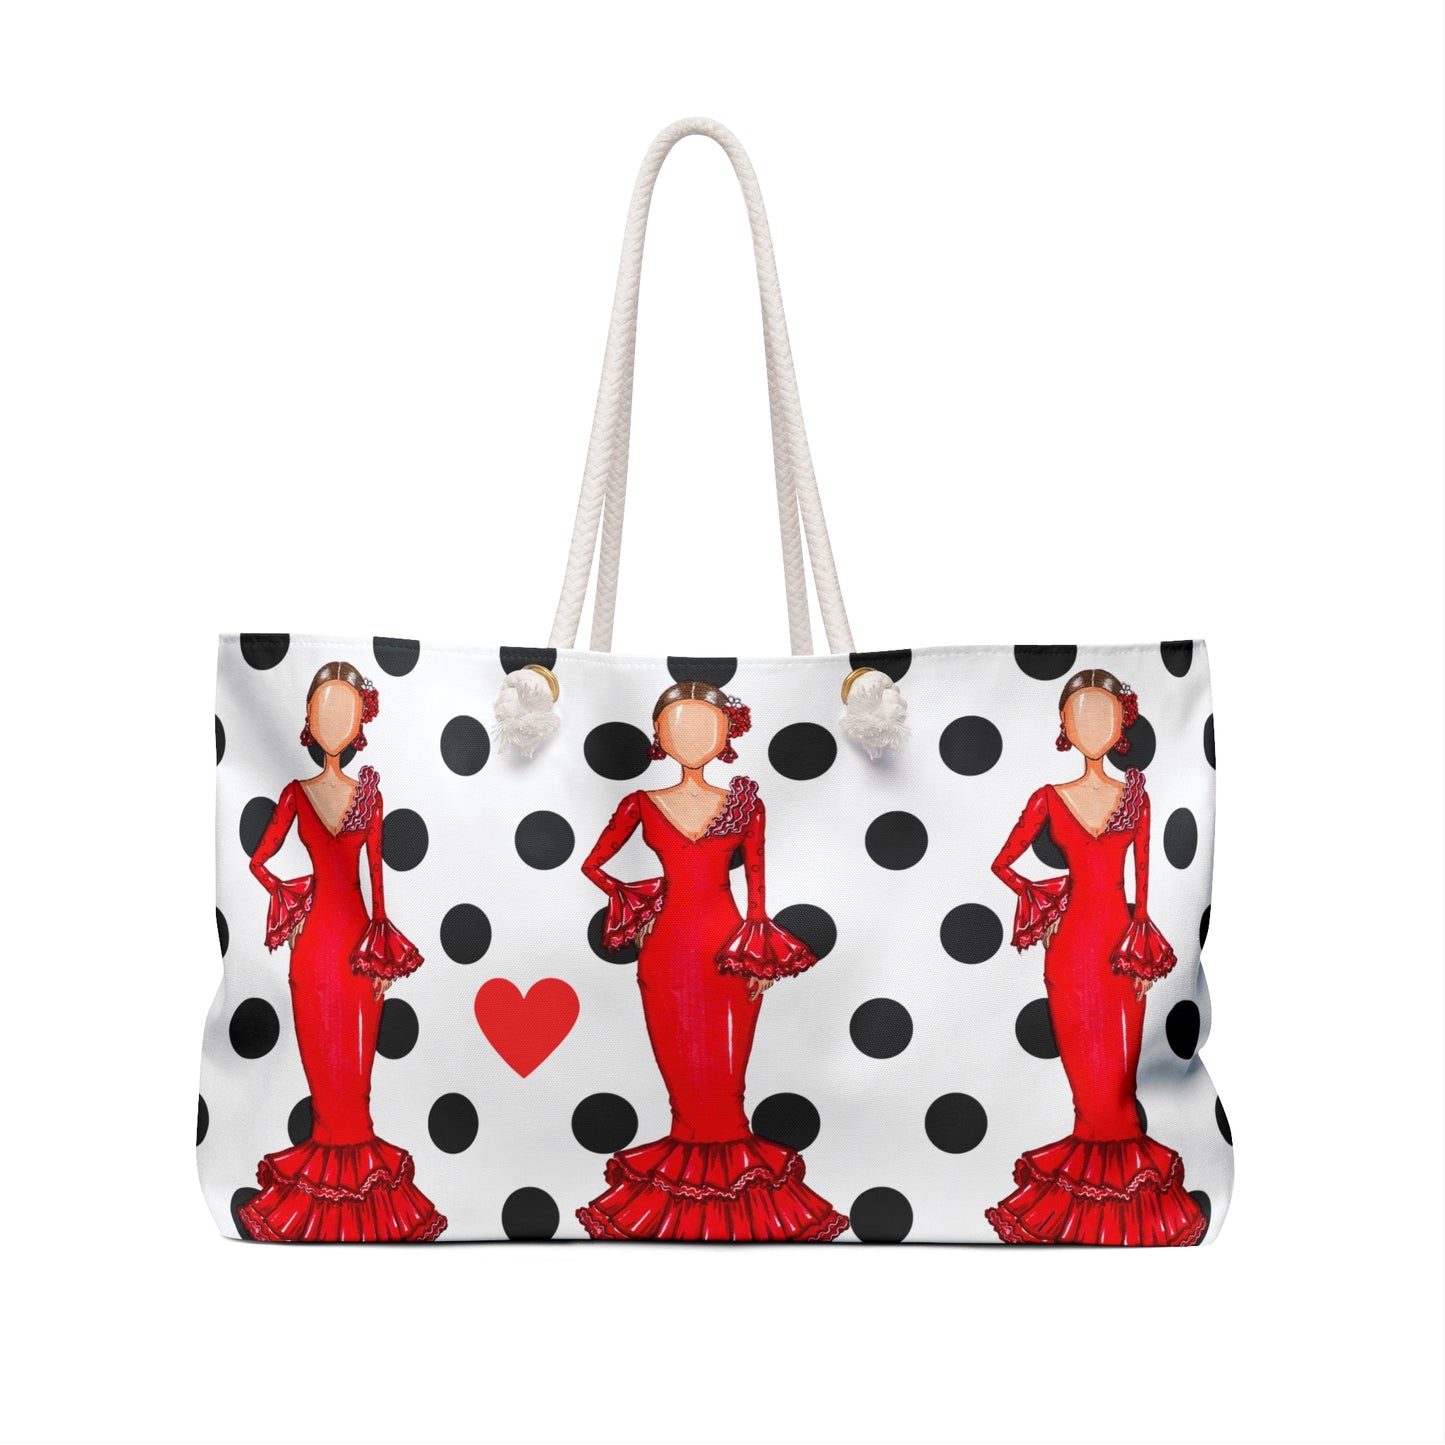 a polka dot bag with a woman in a red dress